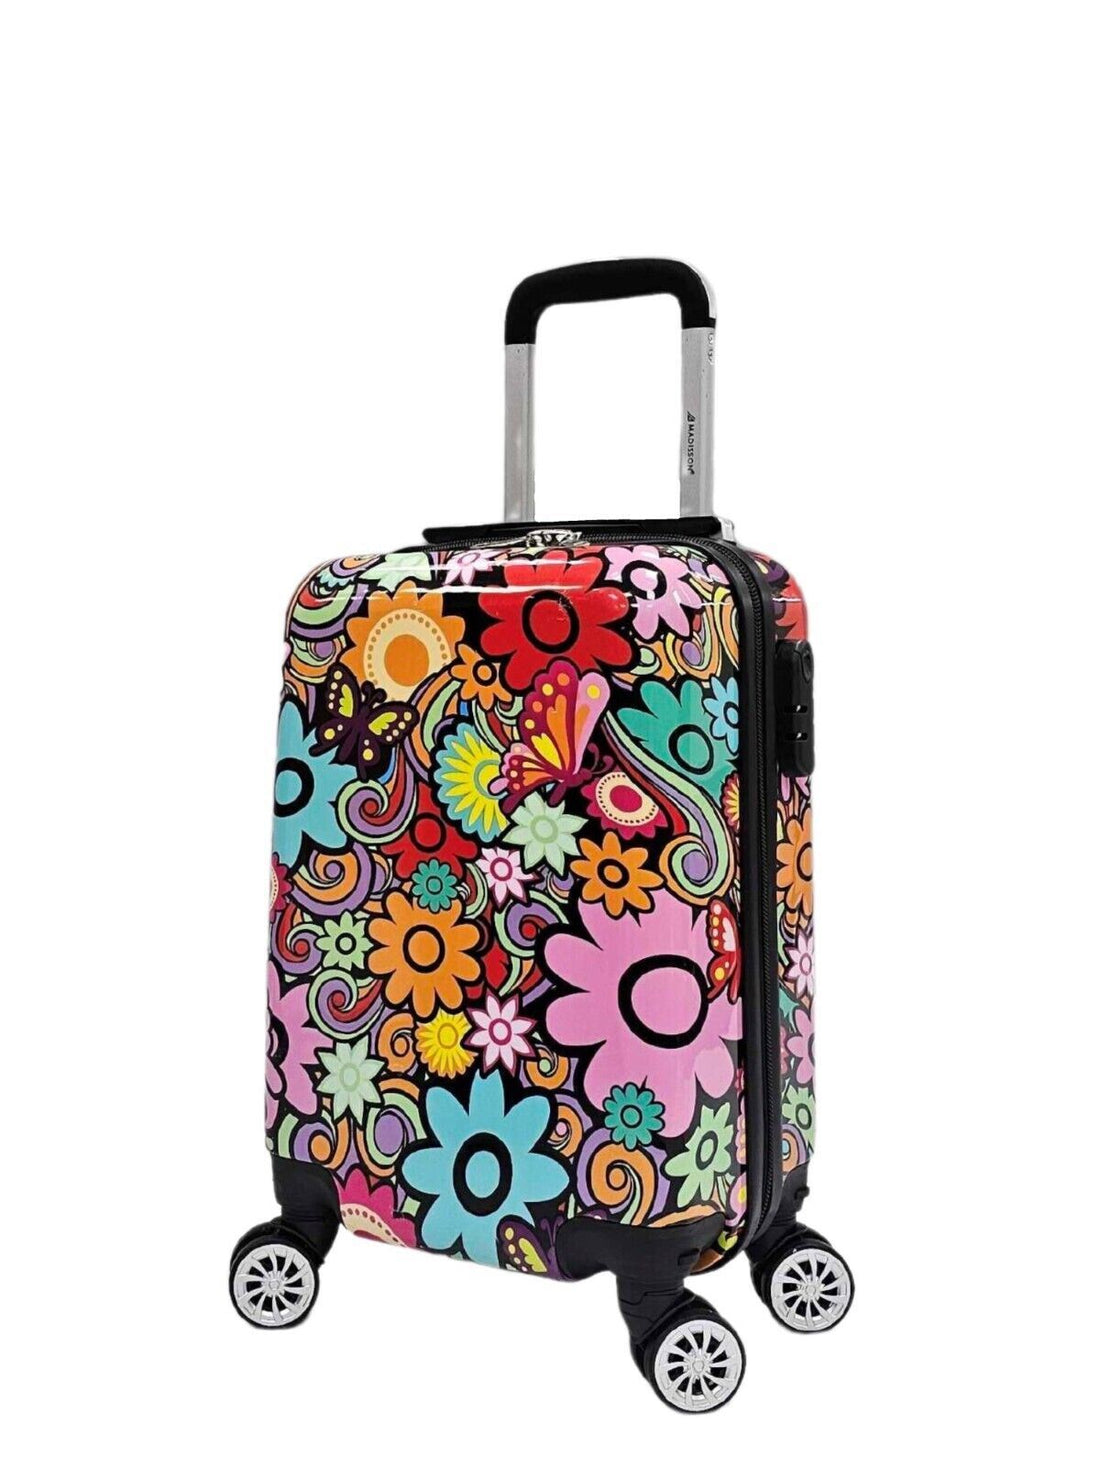 Hard Shell 4 Wheel Suitcase Set Flower Print Luggage Lightweight Cabin Travel Bags - Upperclass Fashions 